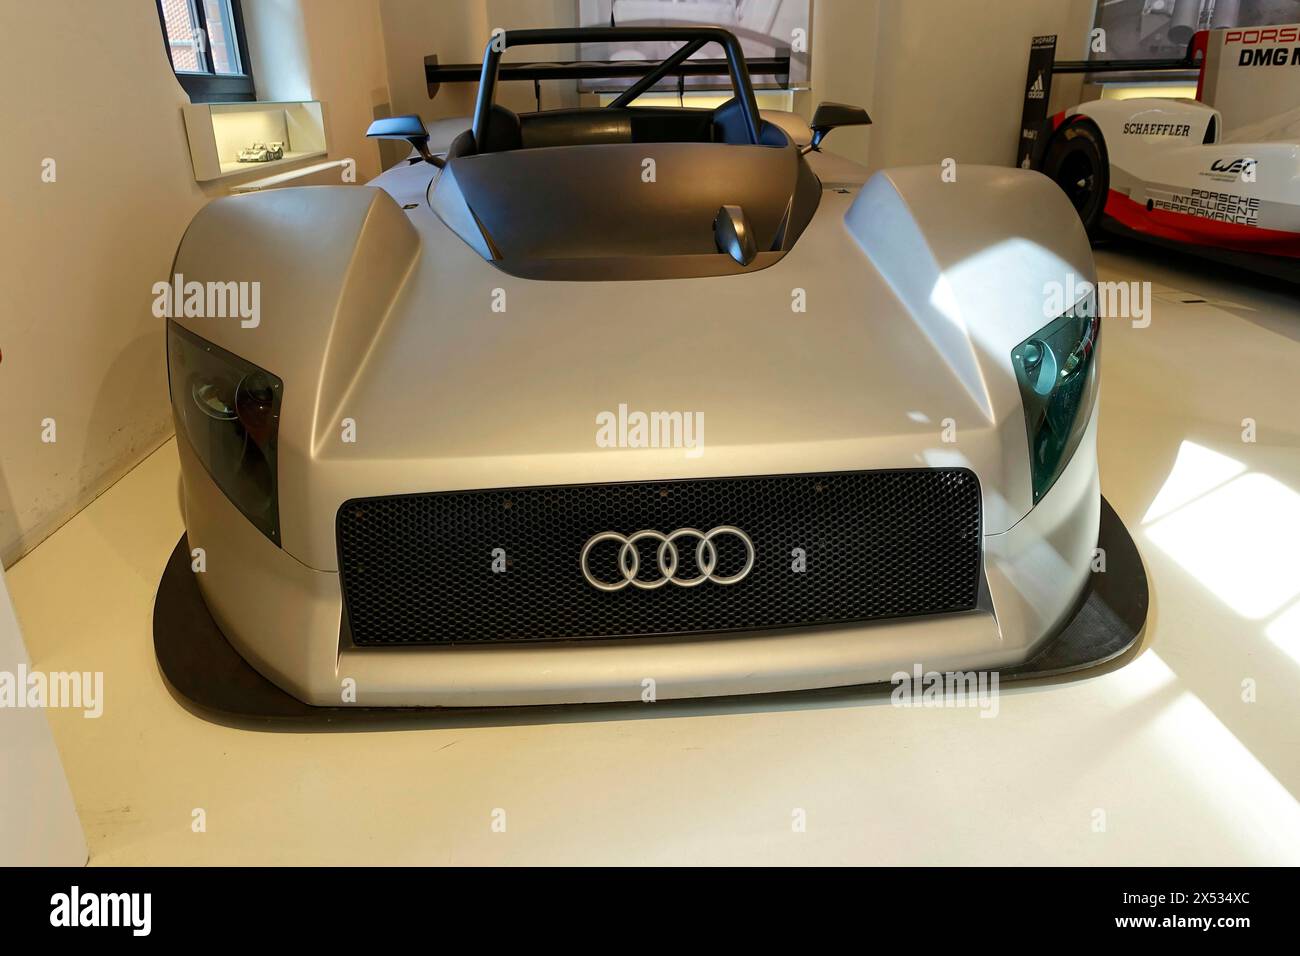 AUDI R8R LMP prototype, front view of a silver Audi sports car in an exhibition, AUTOMUSEUM PROTOTYP, Hamburg, Hanseatic City of Hamburg, Germany Stock Photo